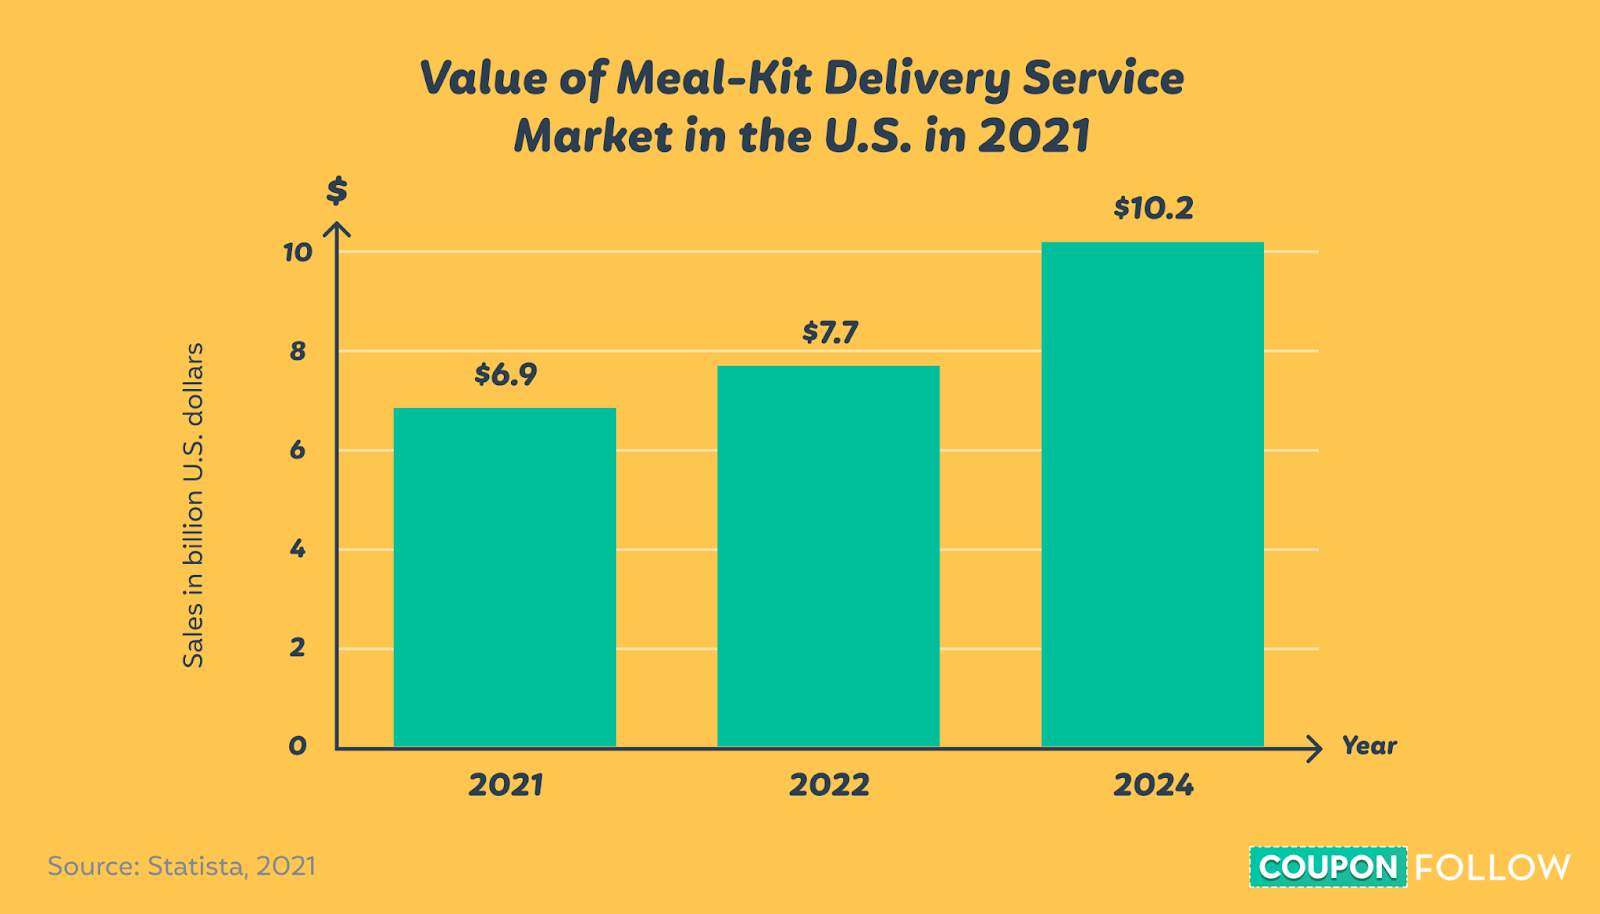 Illustration showing the estimated sales of the fresh-food meal kit industry in the U.S. from 2021 to 2024